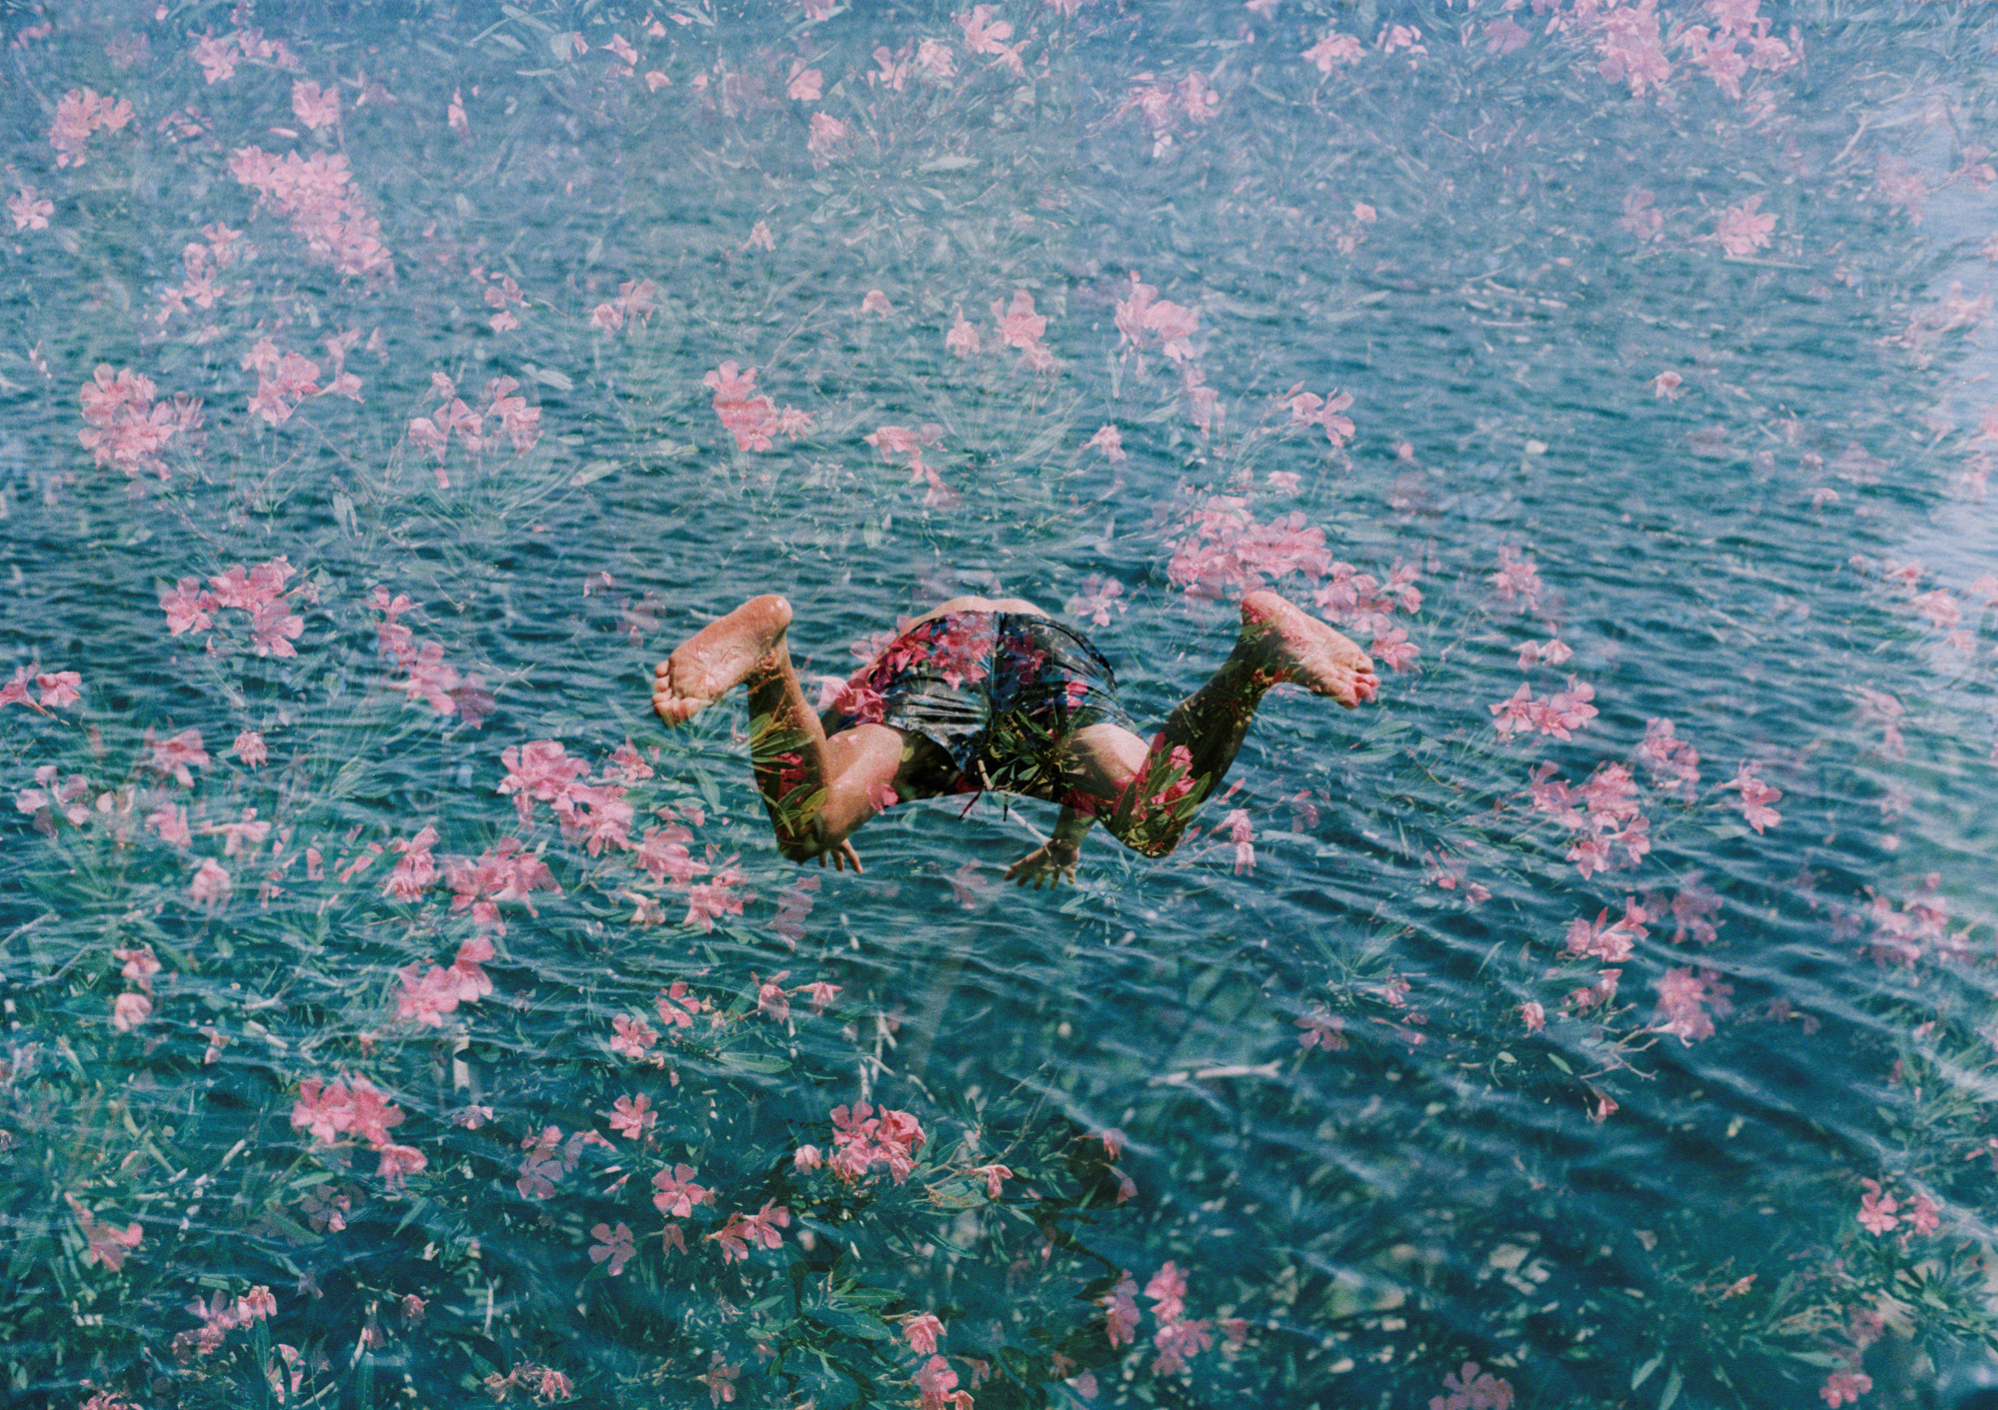 Diving into Pink Flowers from Keep It Weird fine art photography